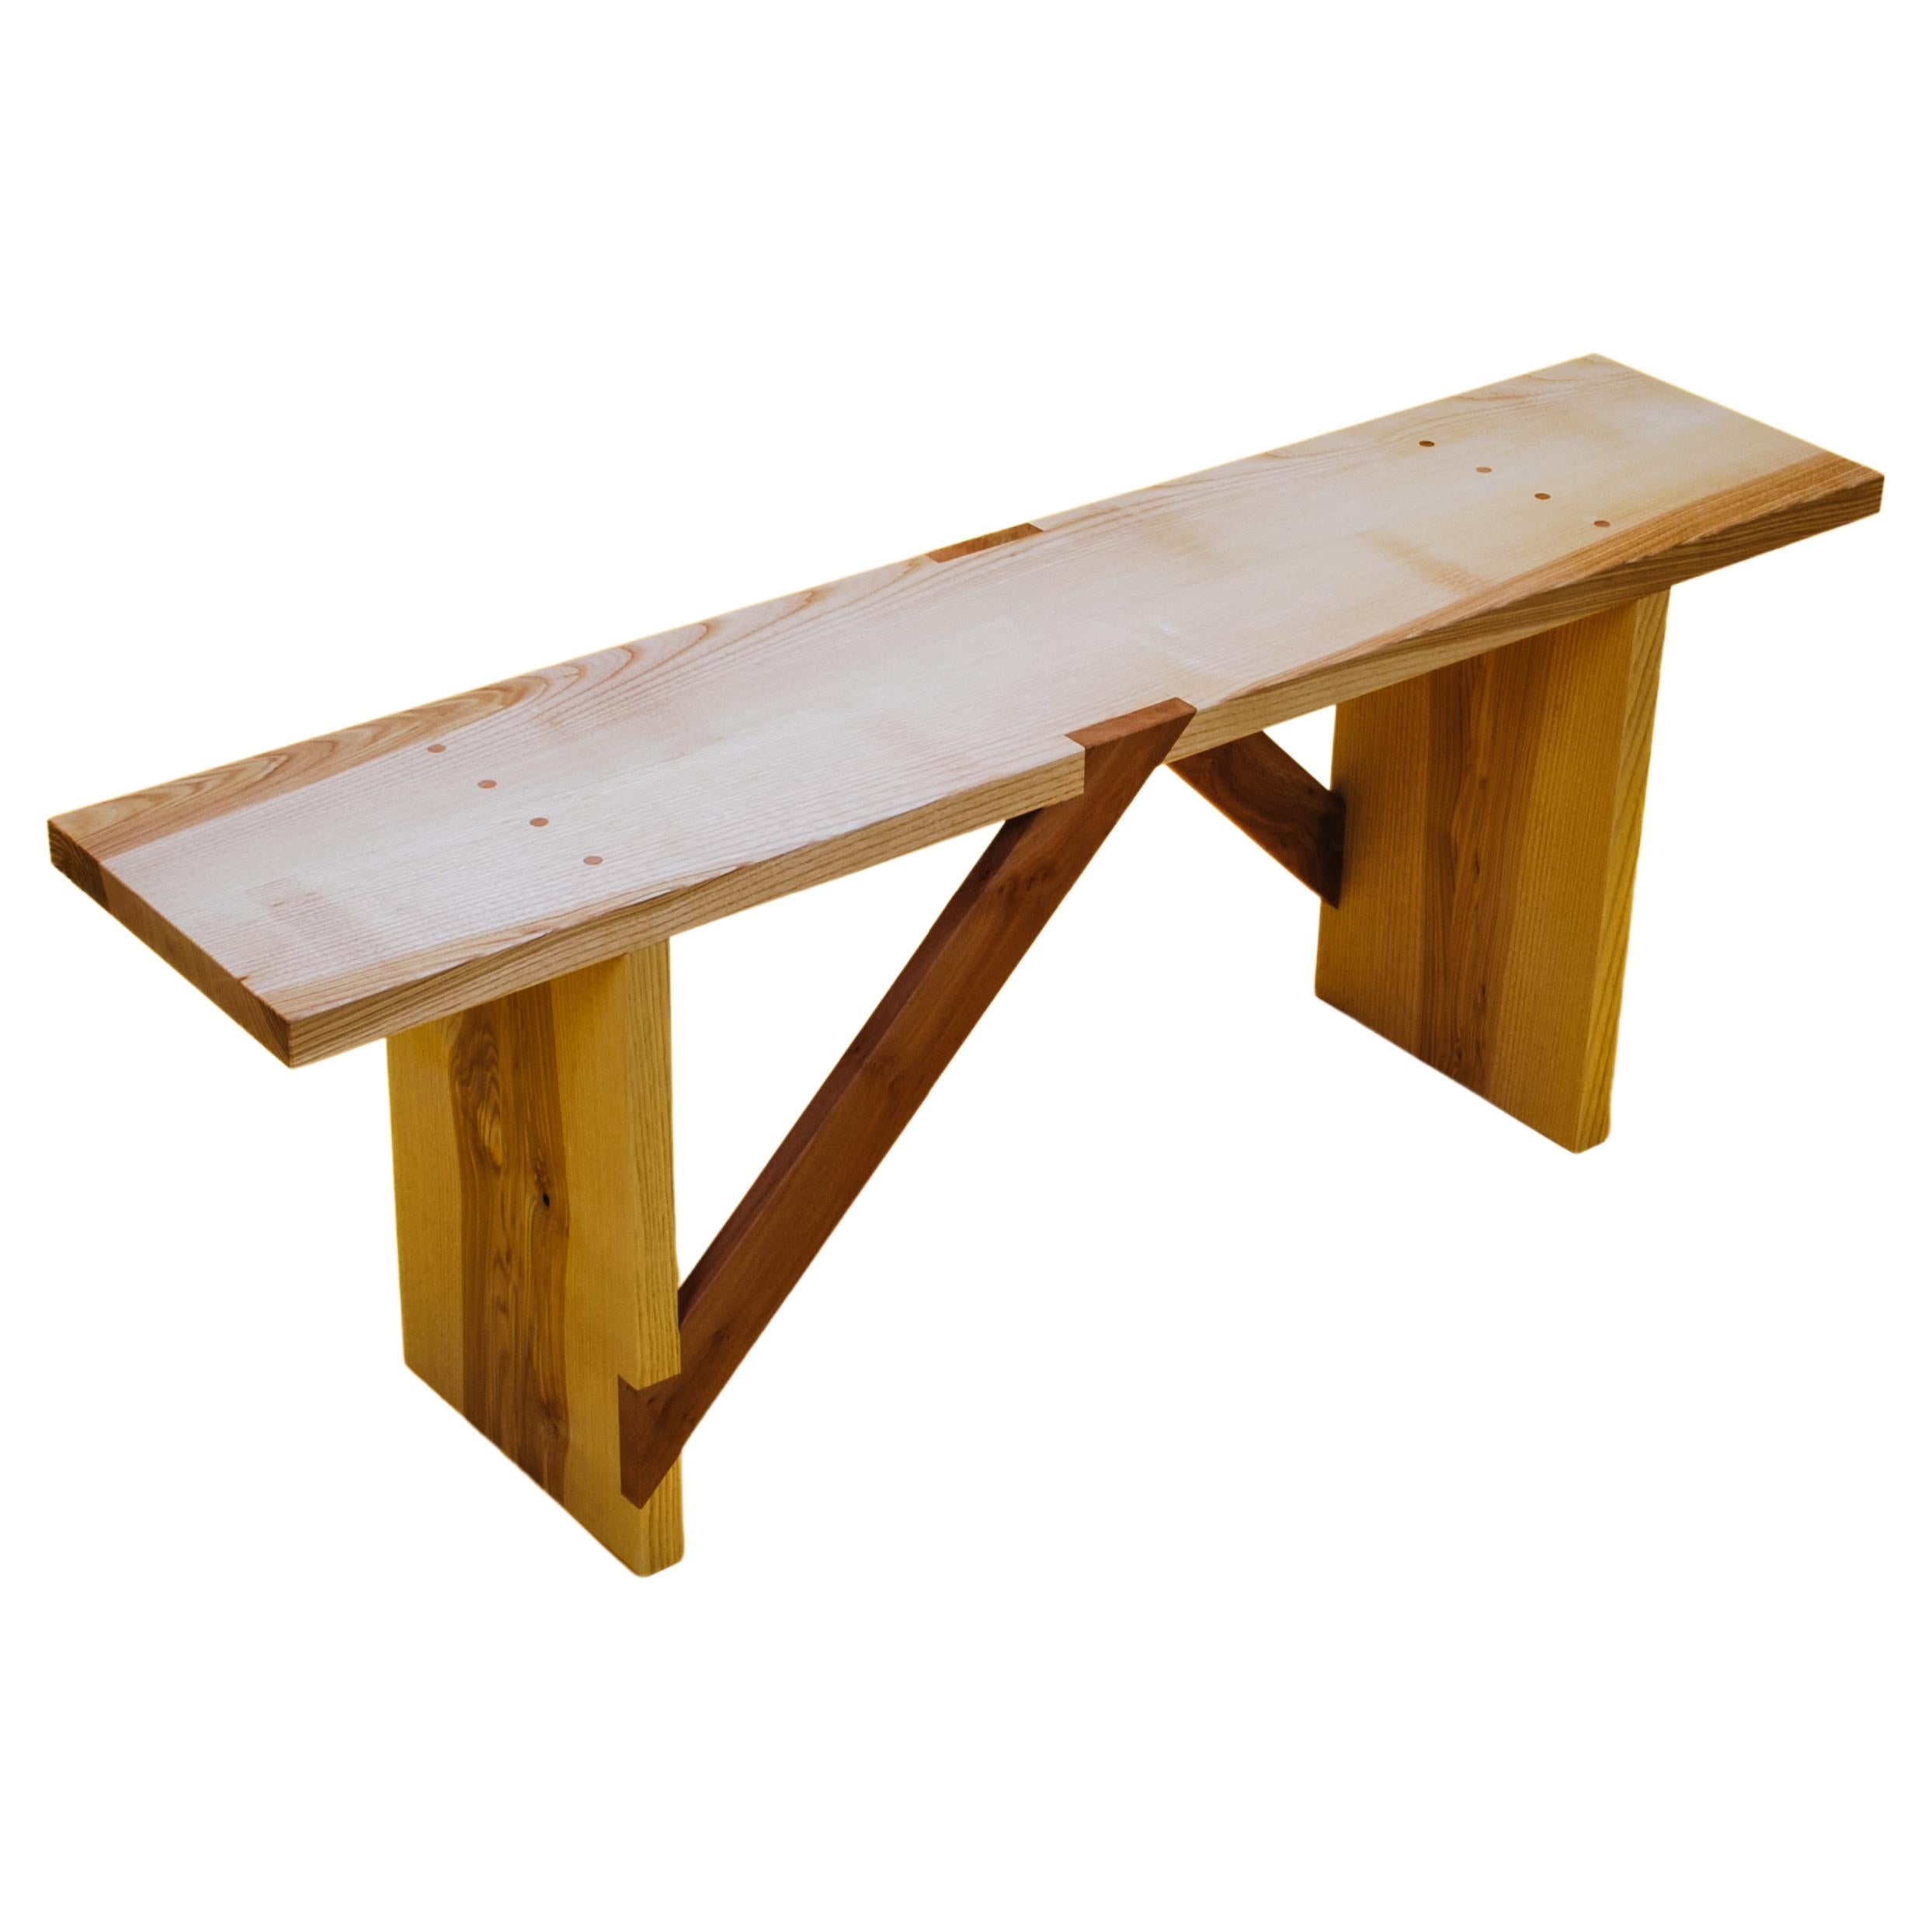 Bench in Solid English Ash and London Plane, designed and handmade by Loose Fit.

Both versatile and functional, this wooden bench is made from a light coloured English Ash that contrasts beautifully with rich brown London Plane braces.

The design